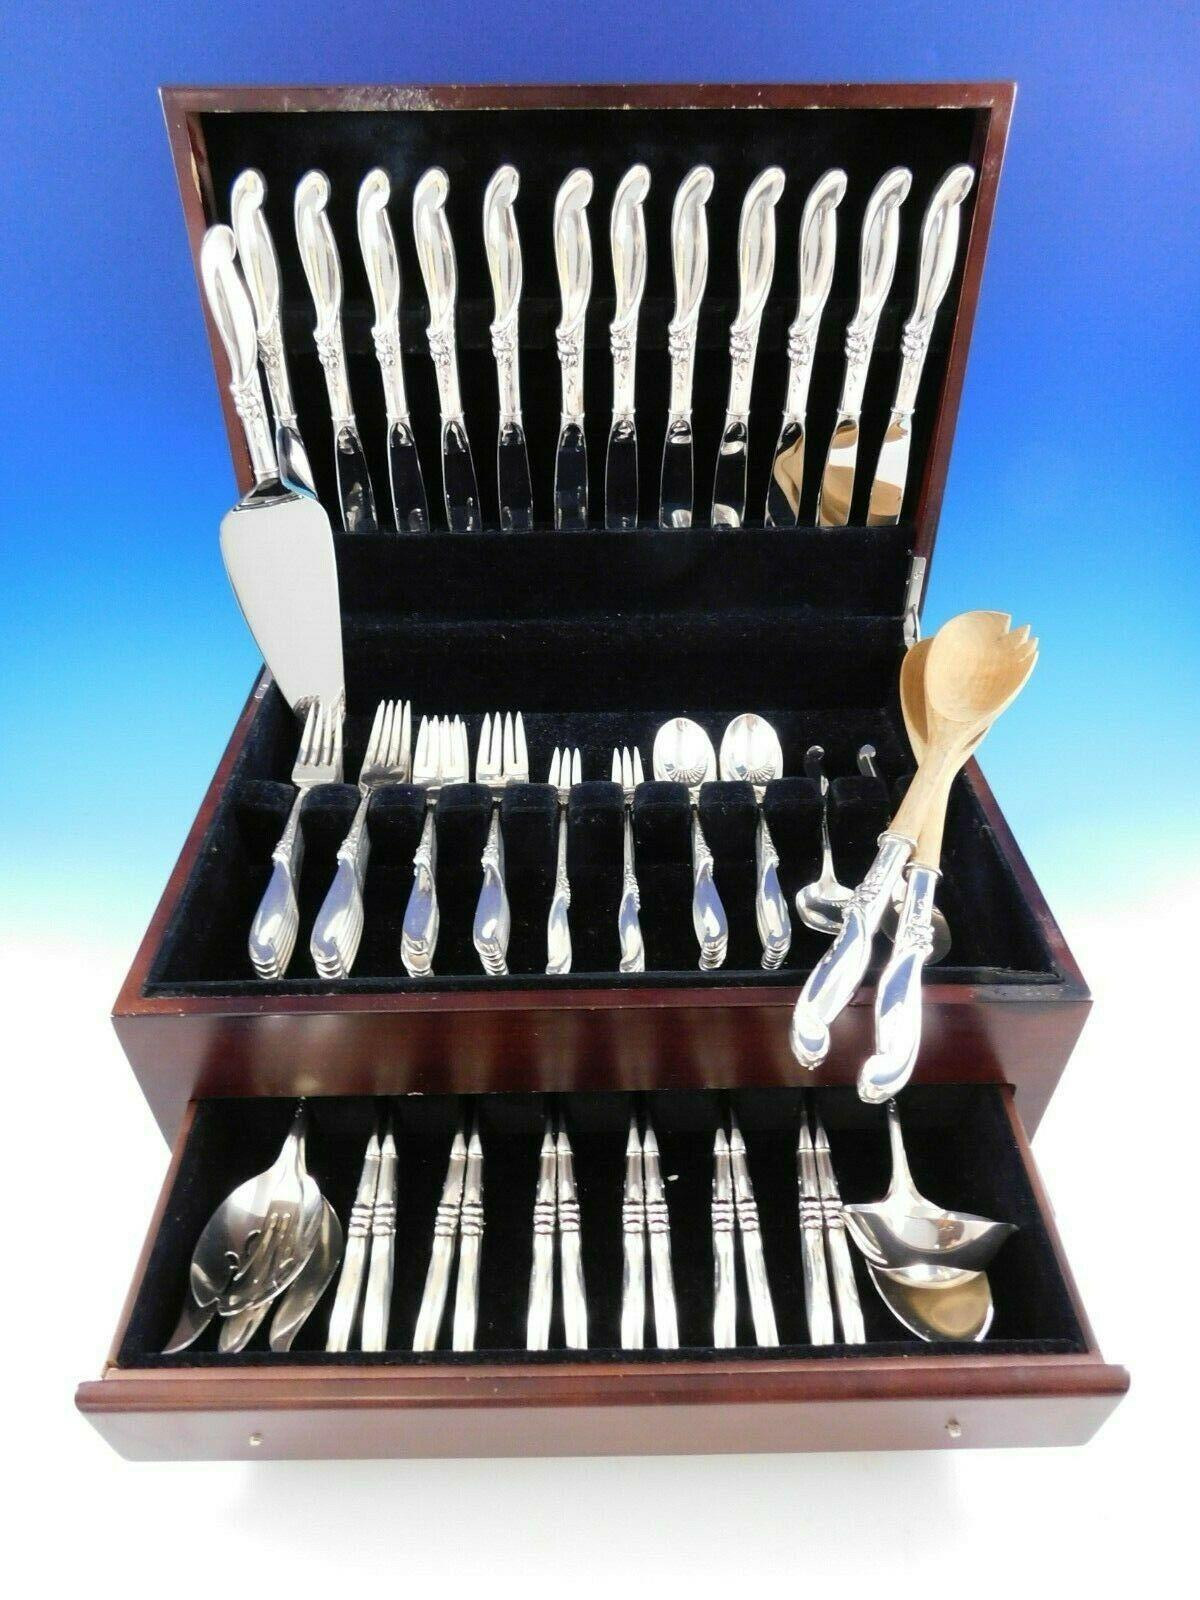 Silver Melody by International sterling silver Flatware set with cool modern shaped handle, 82 pieces. This set includes:

12 knives, 9 1/4